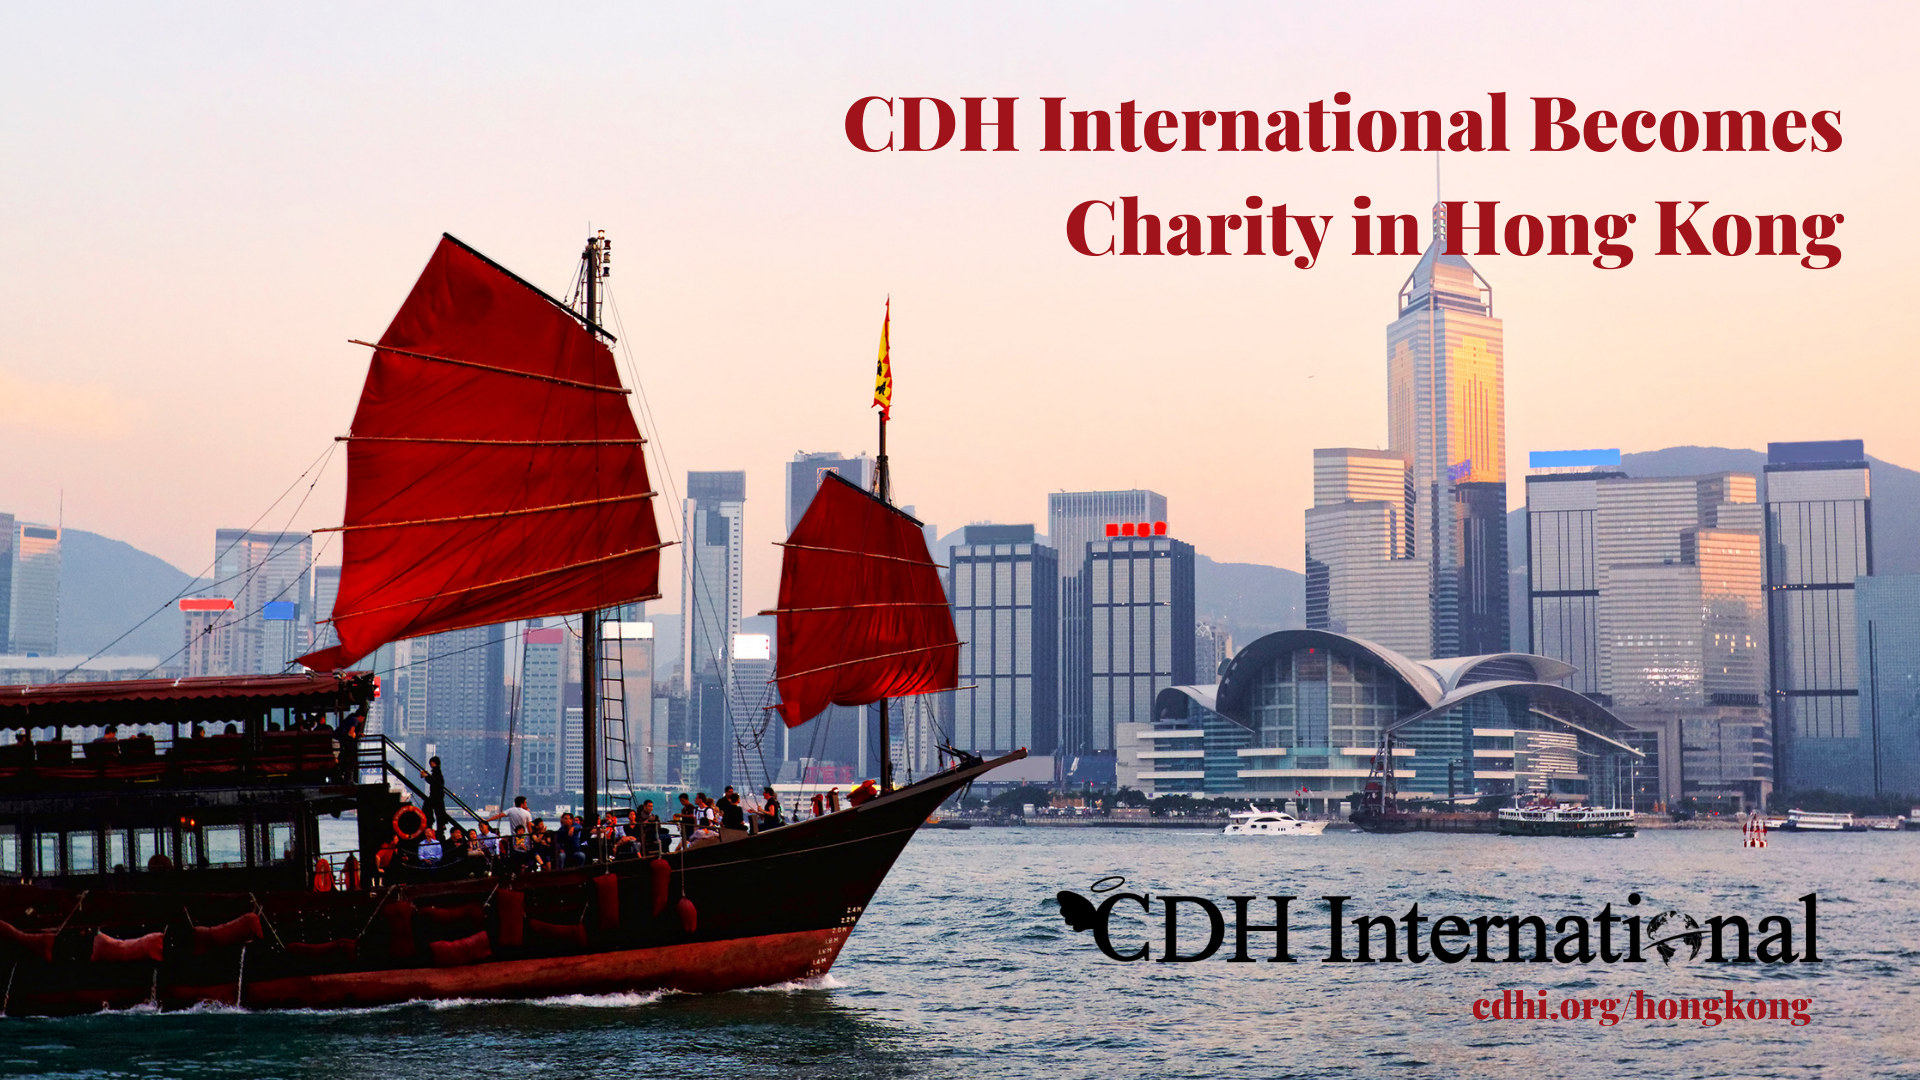 CDH International Becomes A Charity in the Netherlands